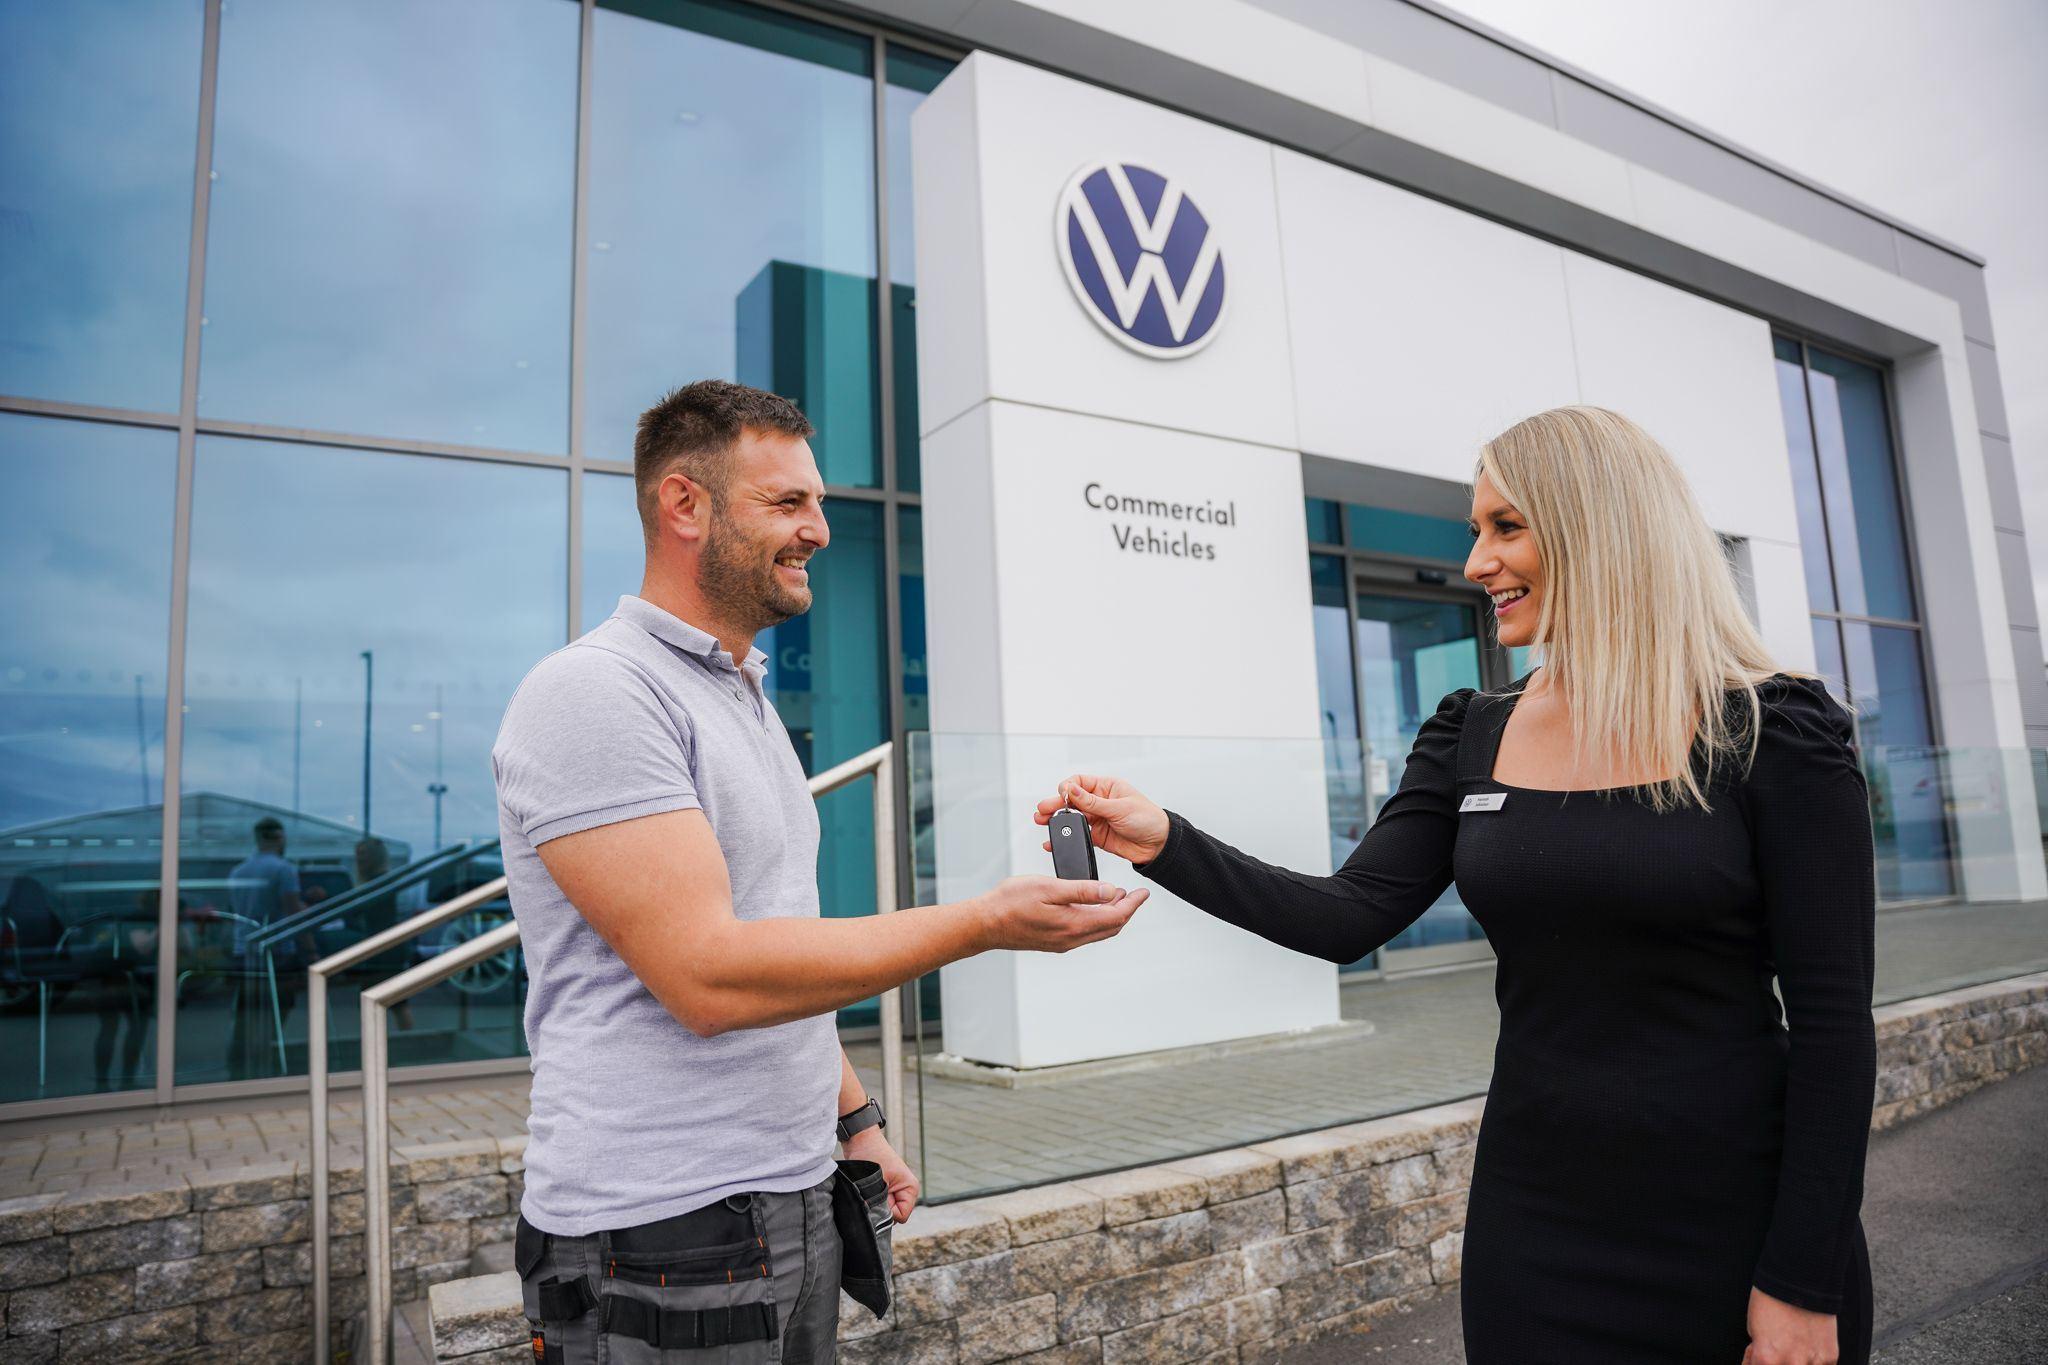 Volkswagen Service Advisor hands over vehicle keys to customers at the entrance of Agnew Van Centre